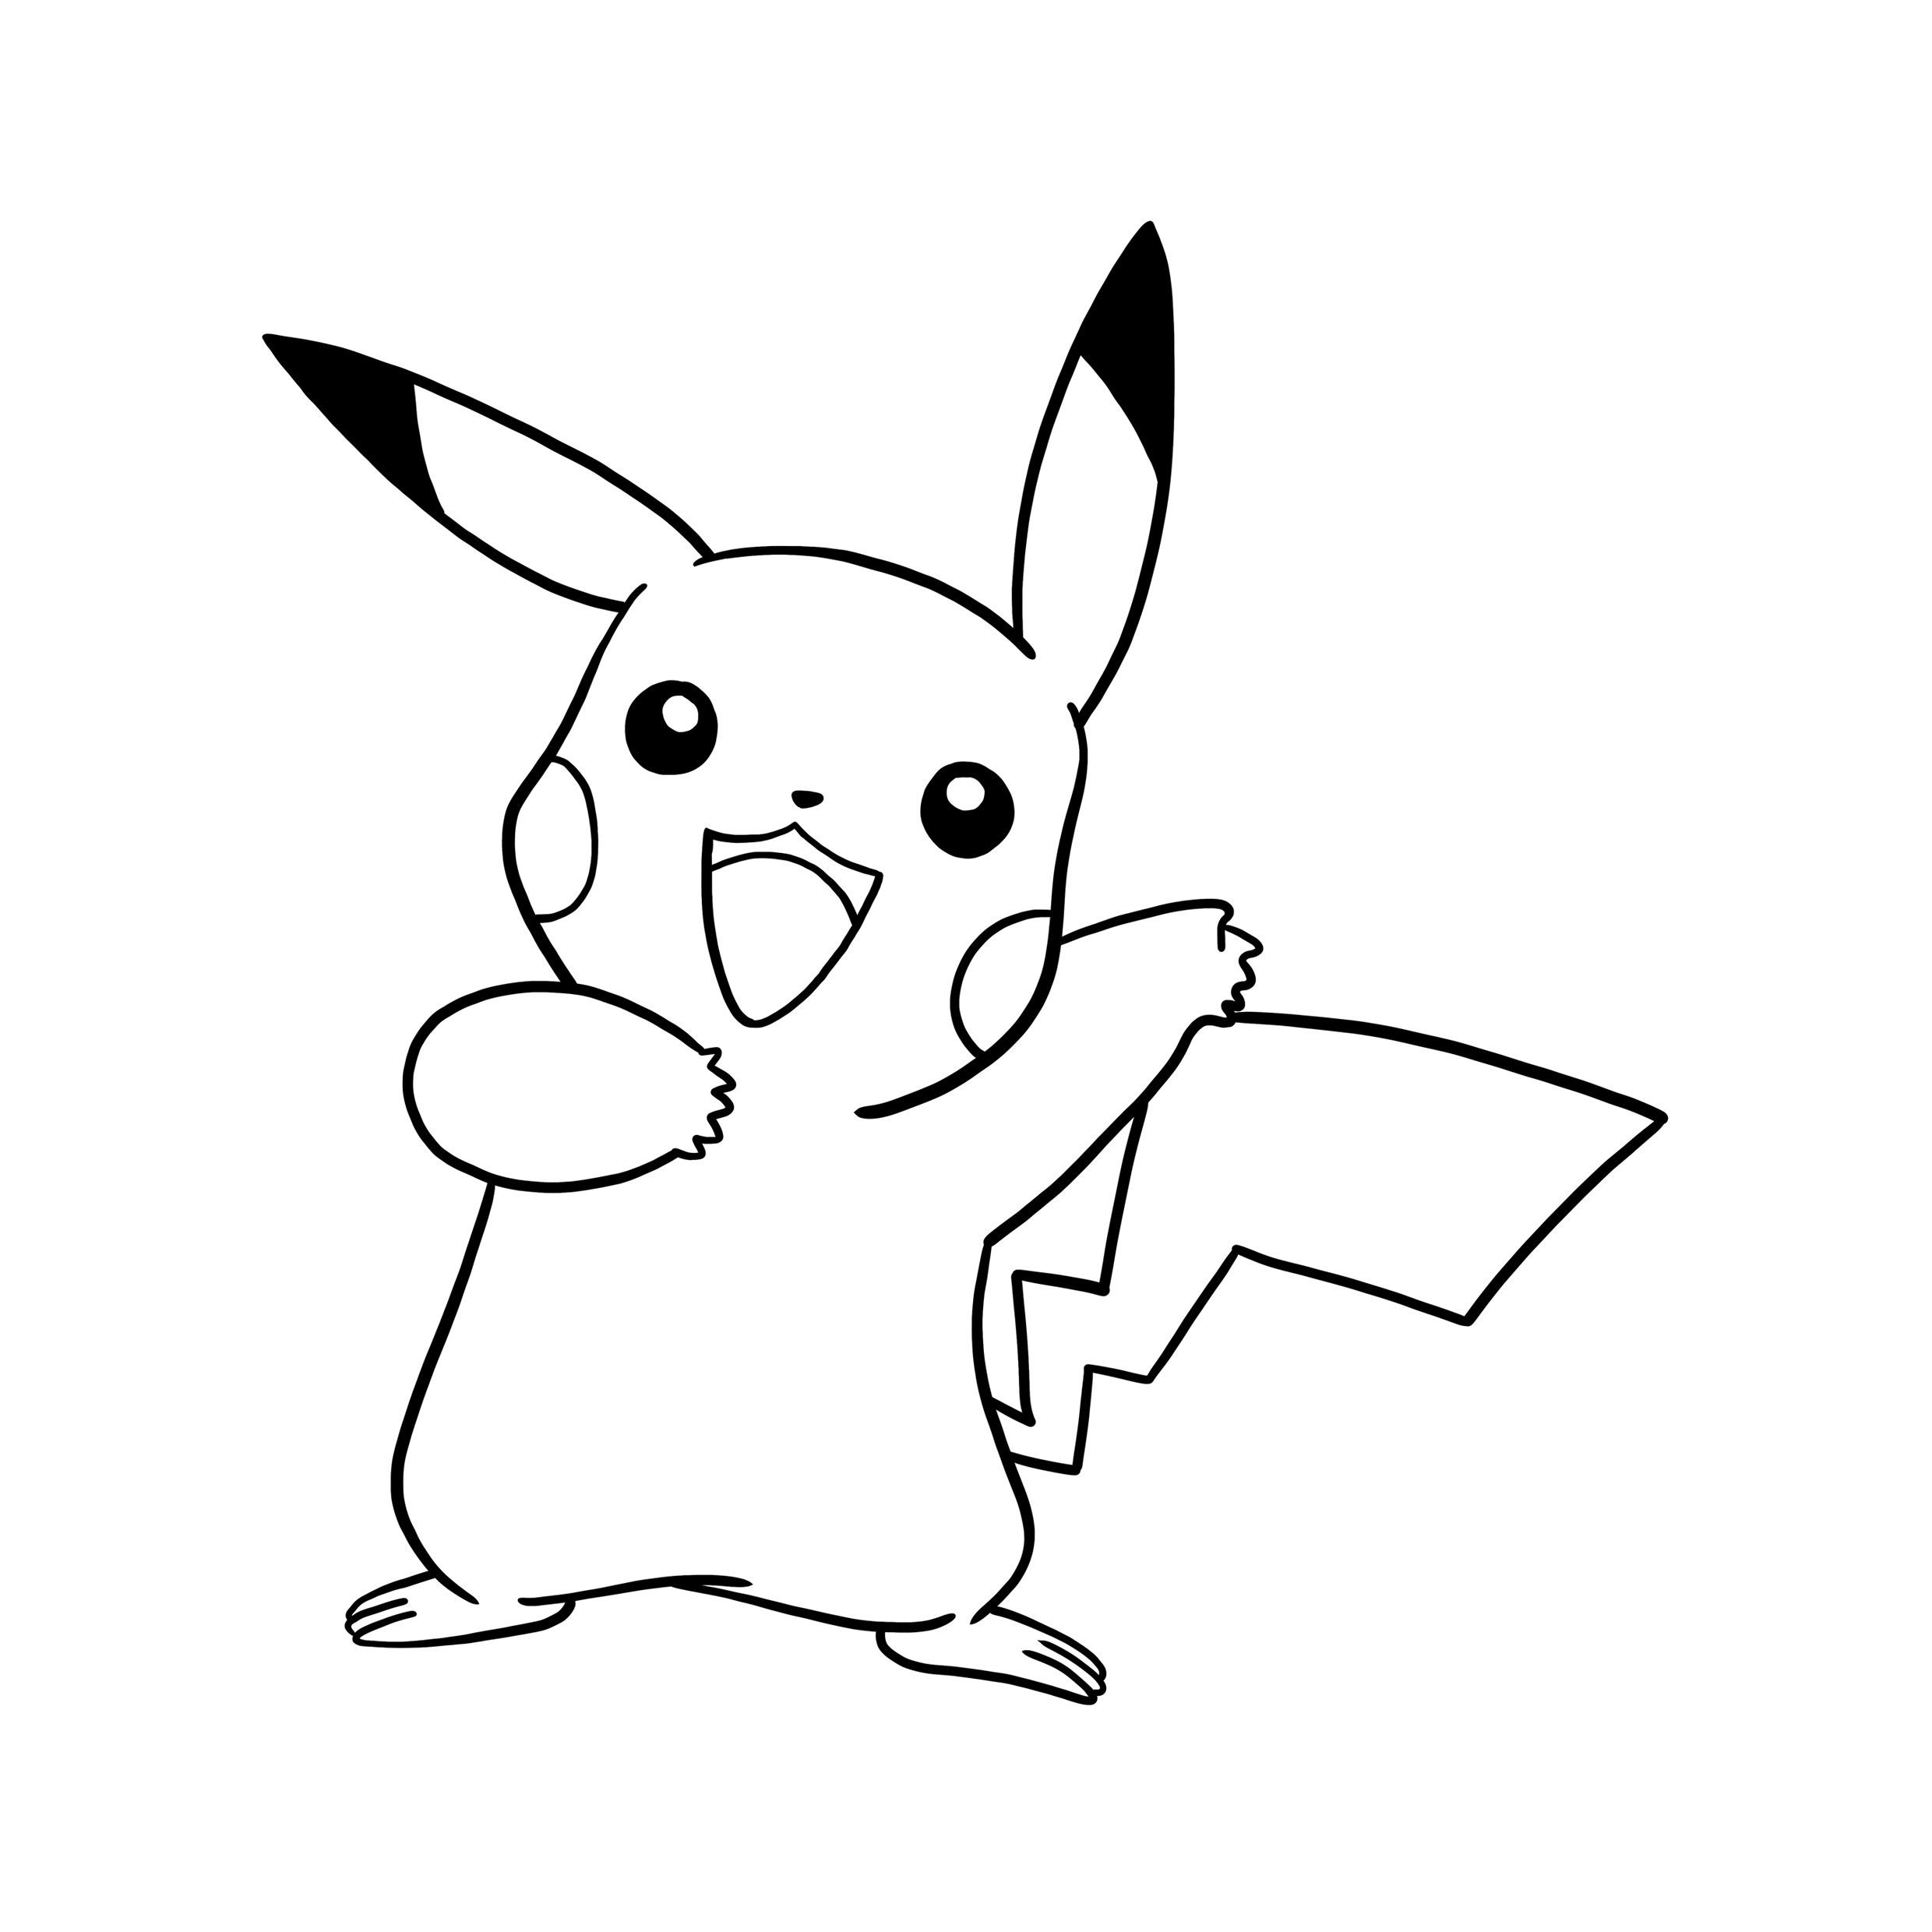 Pikachu Drawings New Easy Pikachu Drawing How to Draw